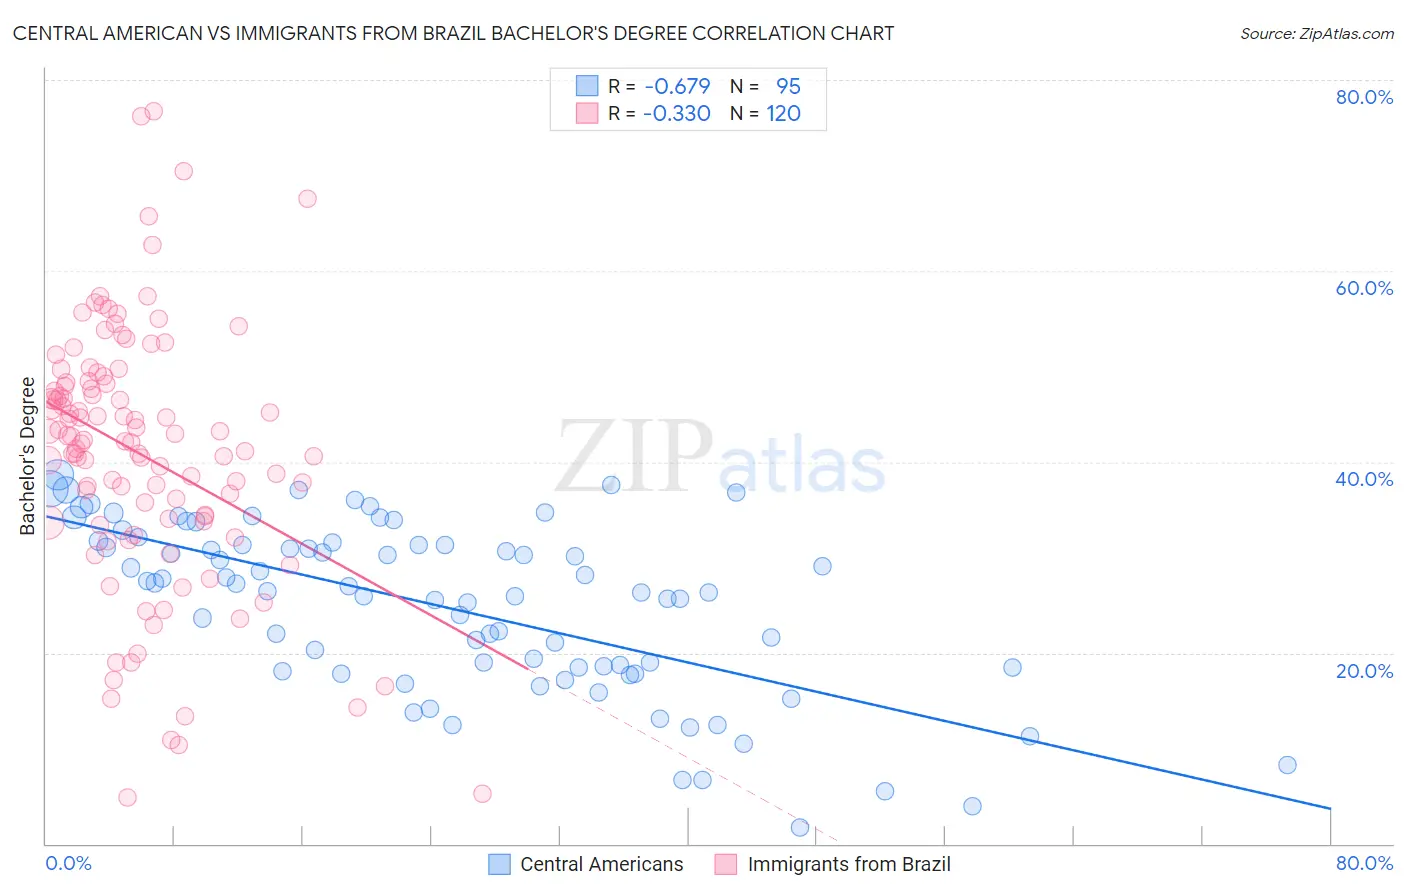 Central American vs Immigrants from Brazil Bachelor's Degree